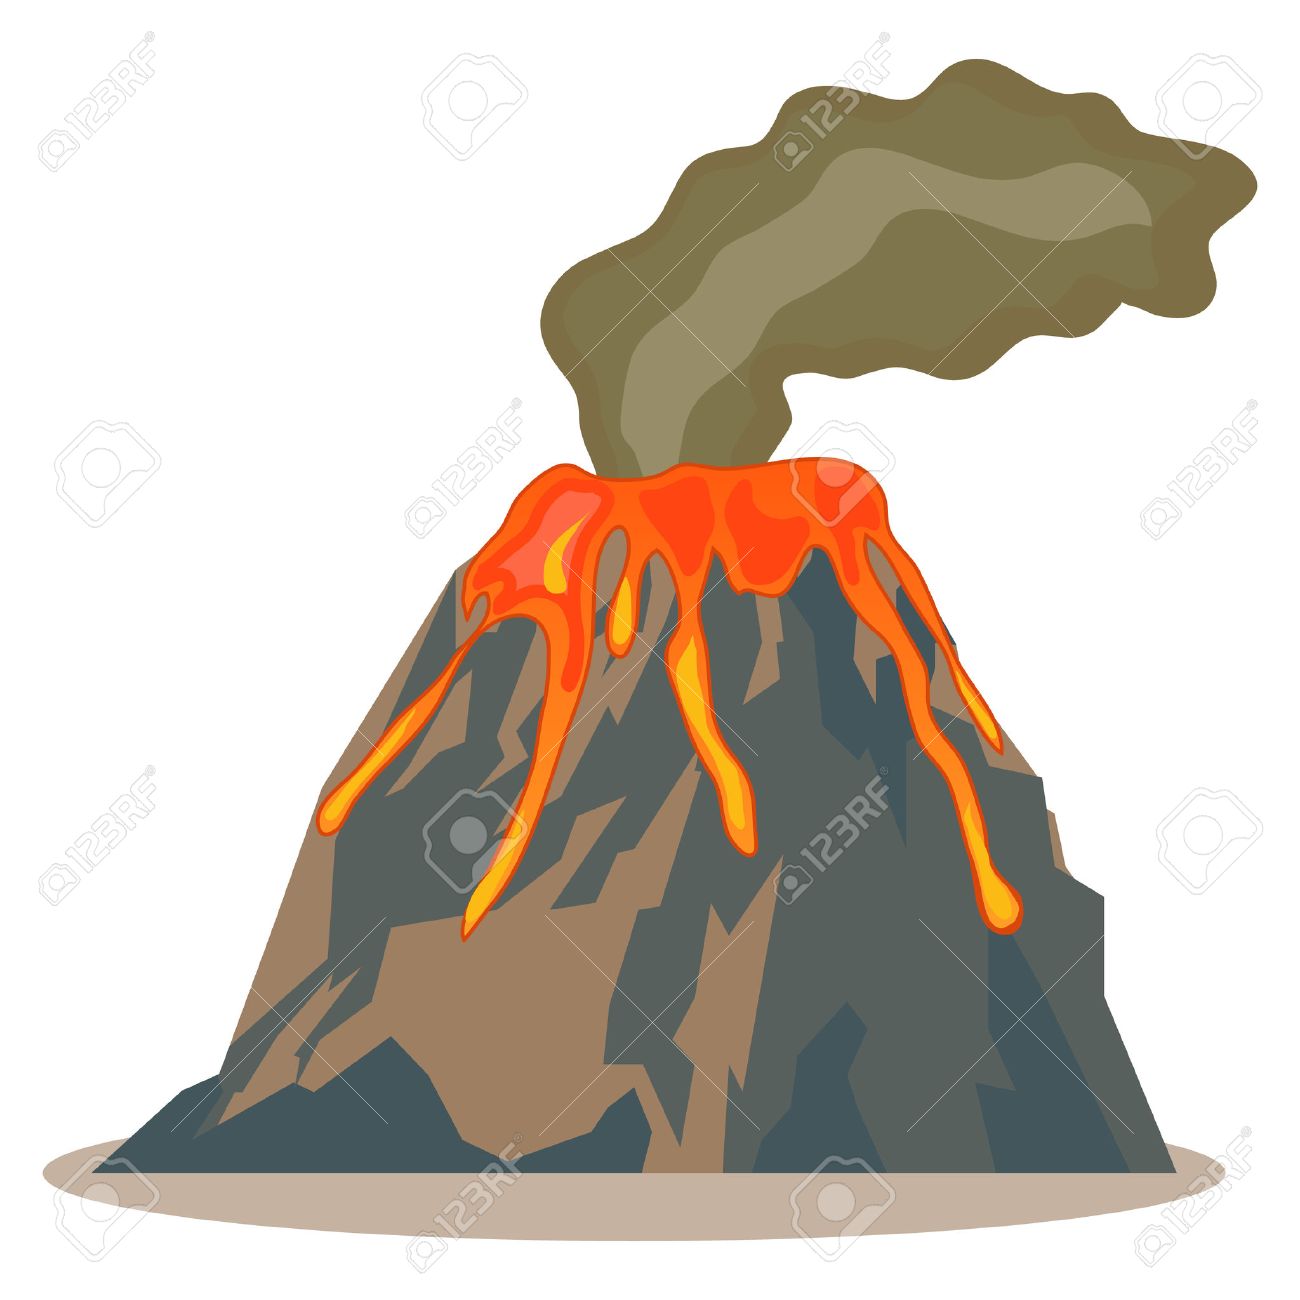 Collection of free download. Island clipart lava volcano